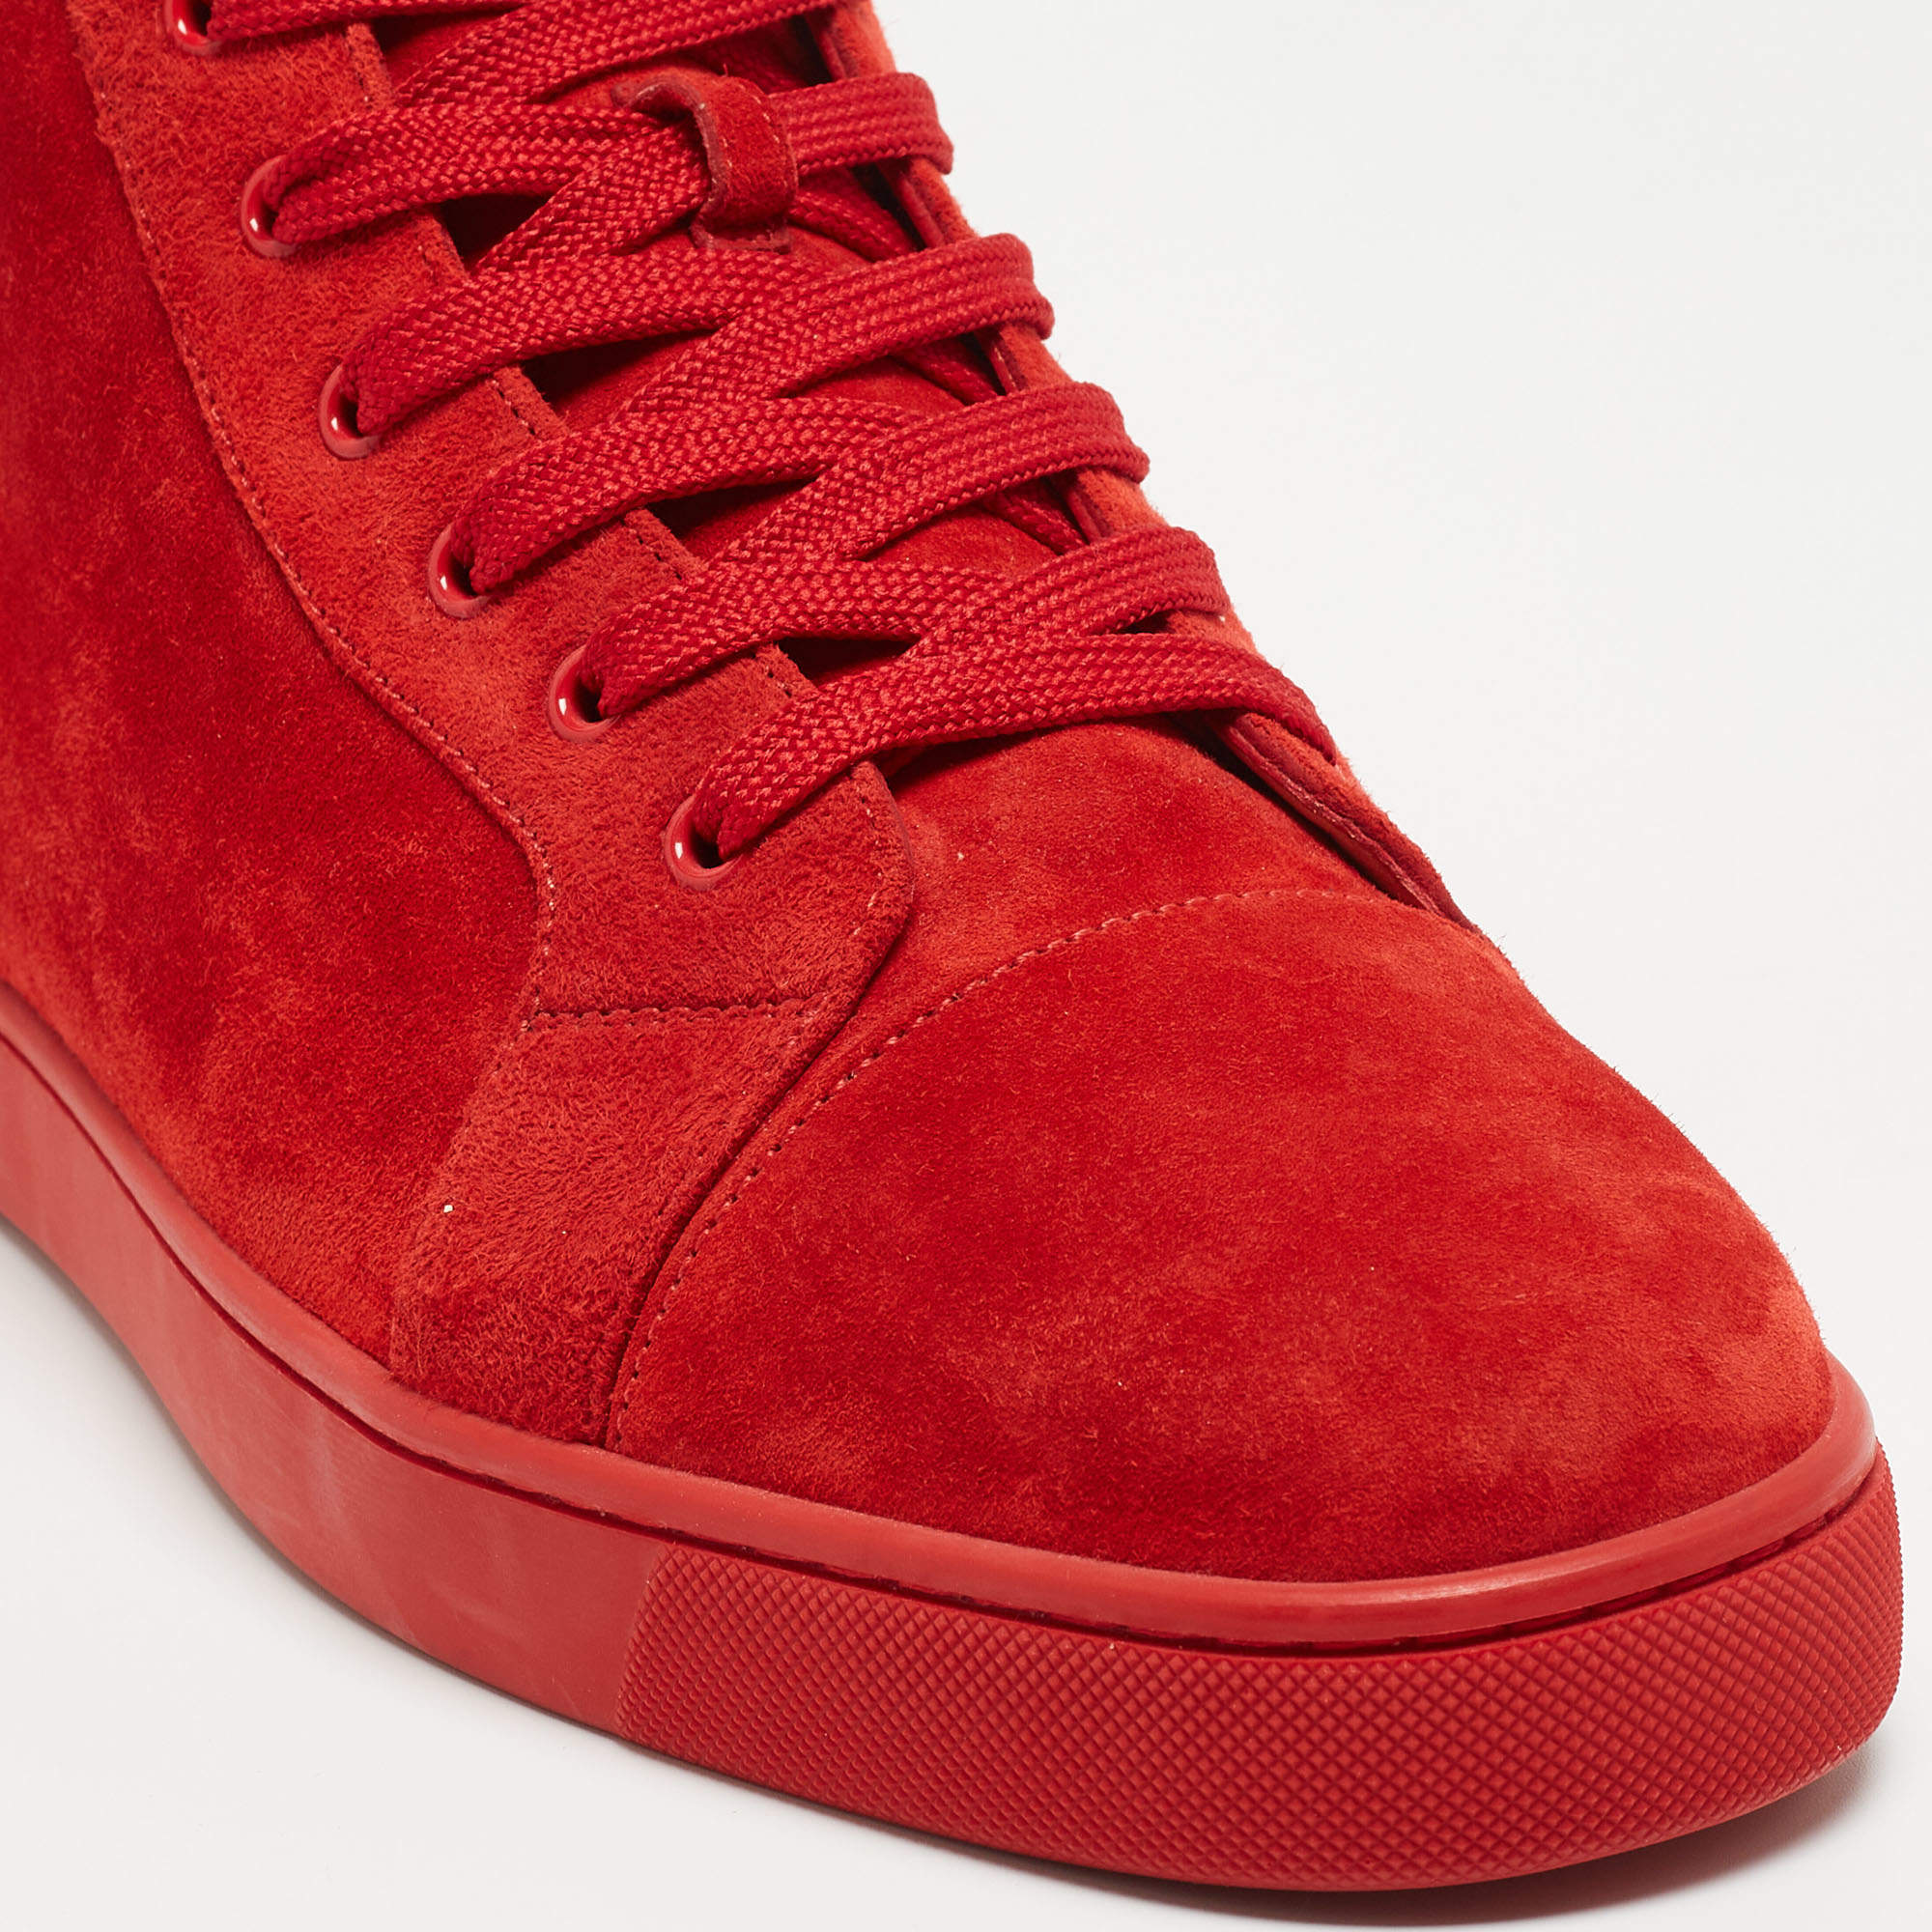 Christian Louboutin Red Suede Galaxtitude High Top Sneakers Size 40  Christian Louboutin | The Luxury Closet